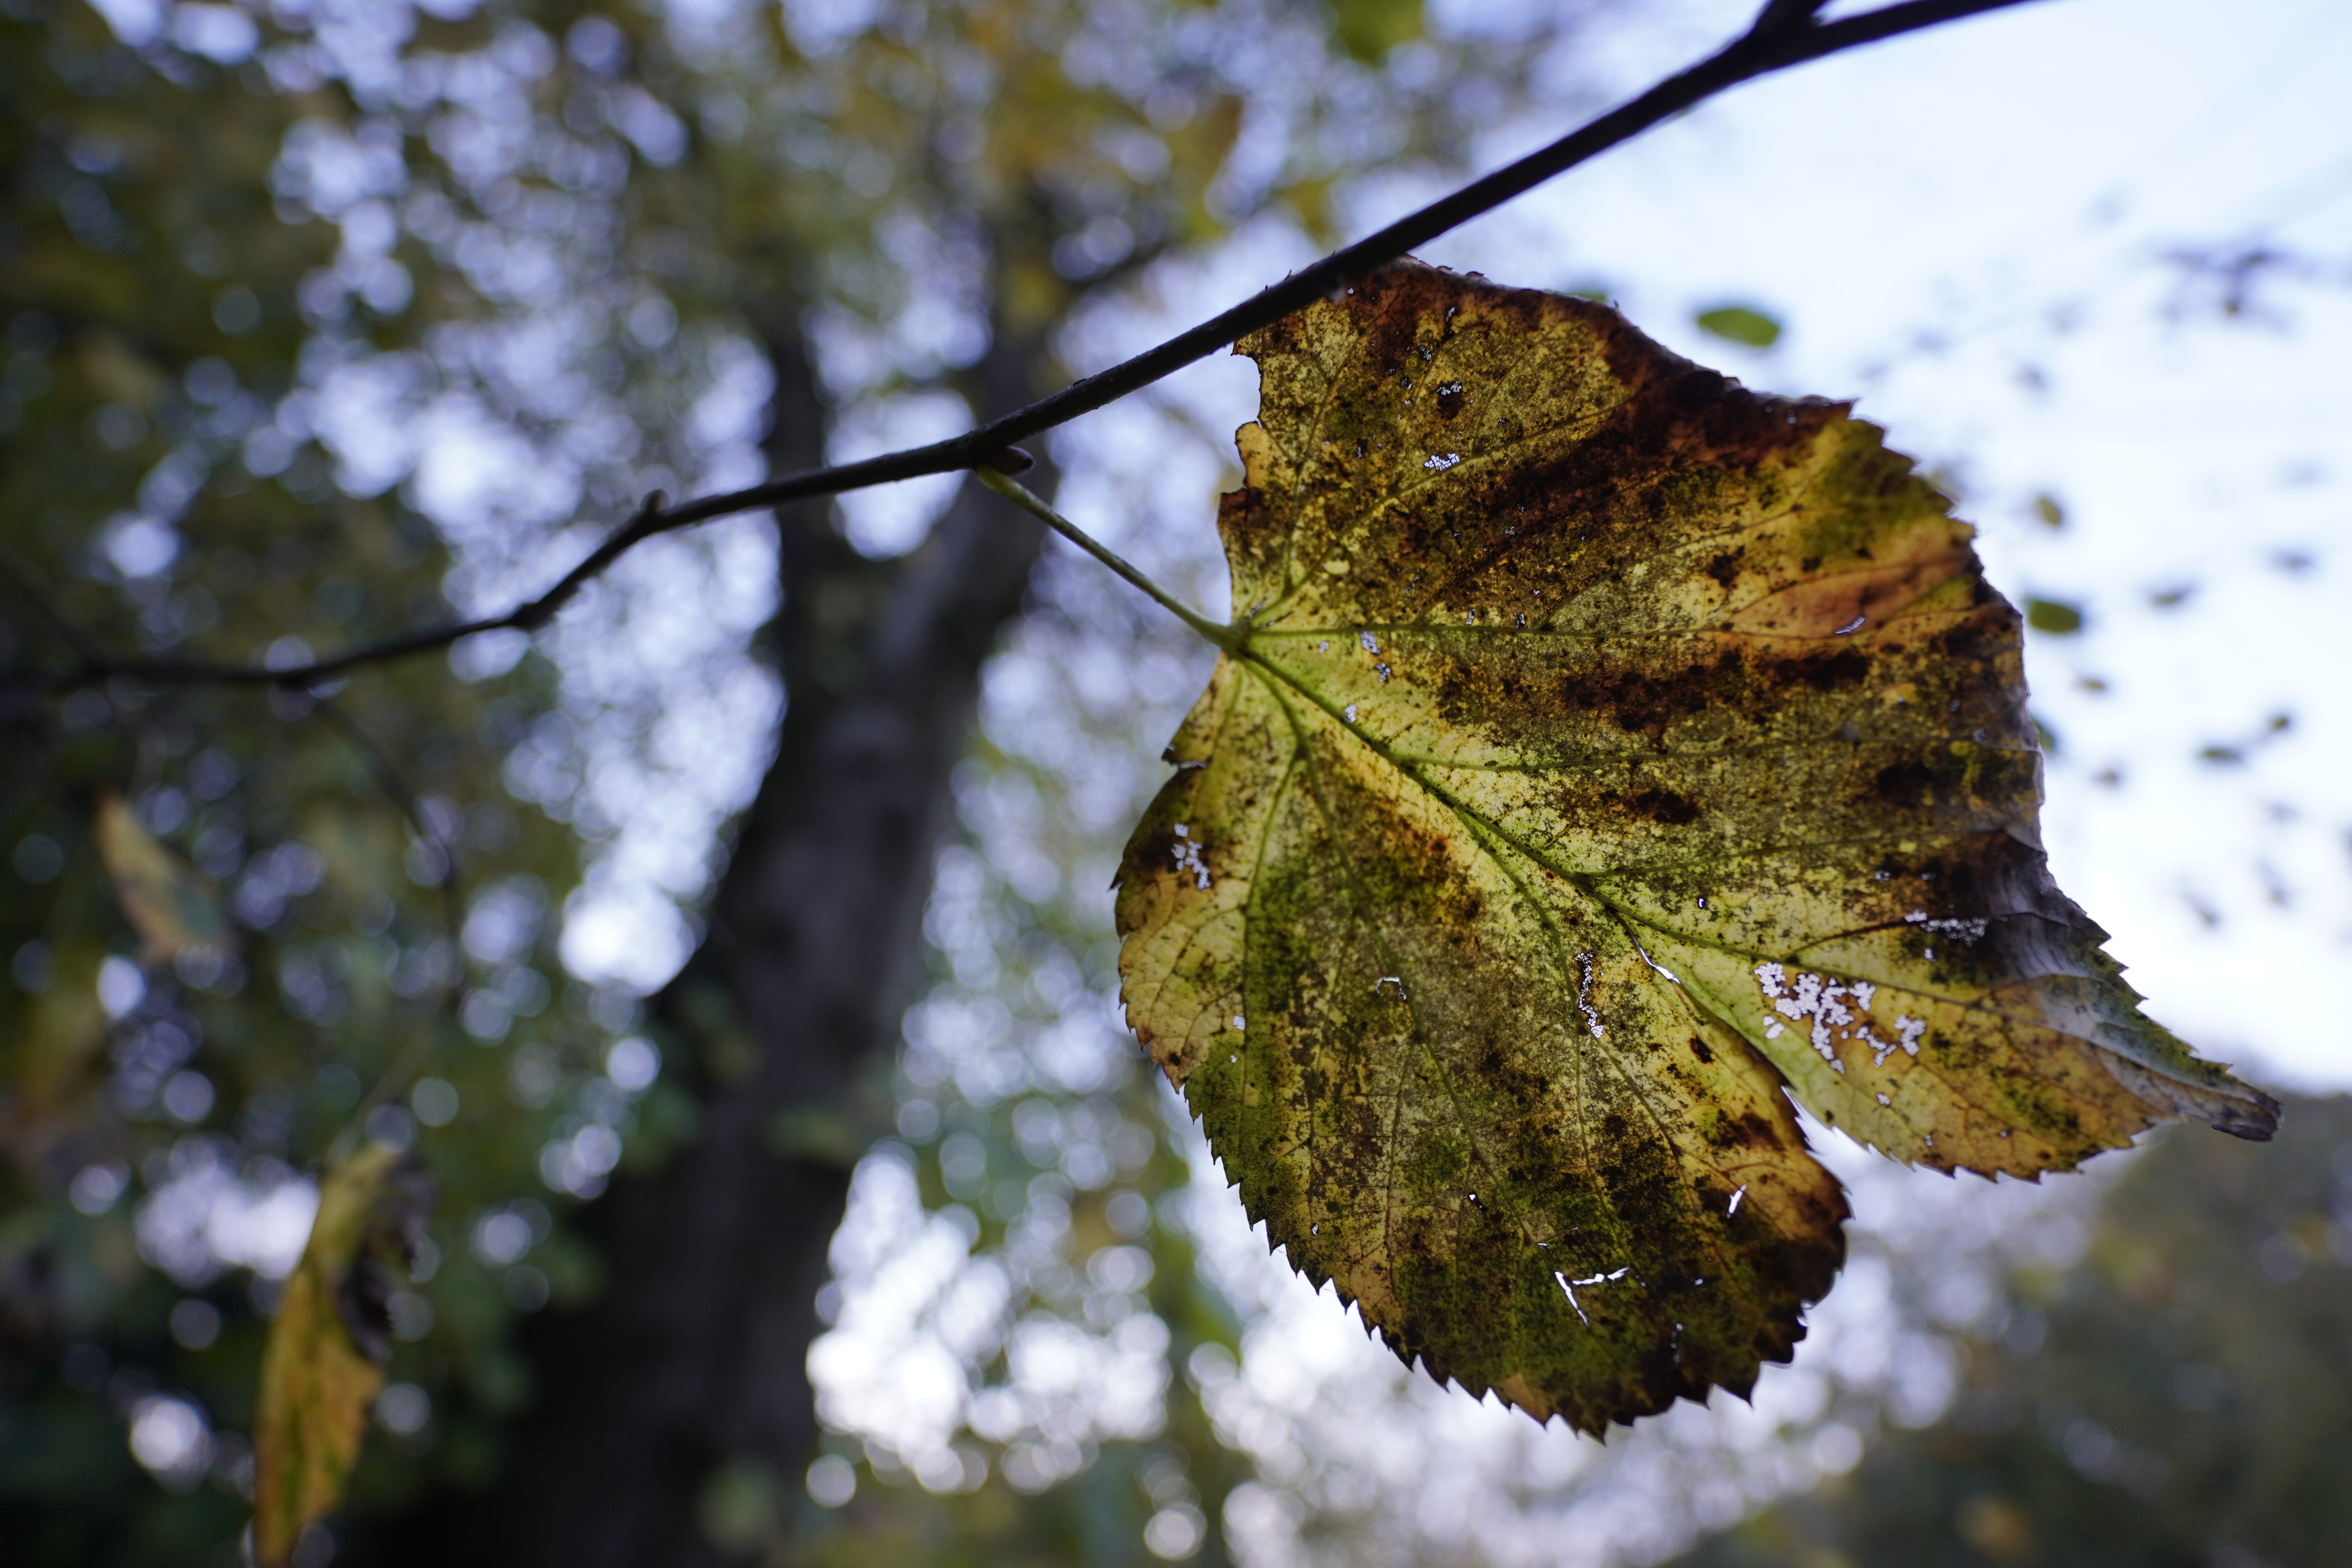 Close focus leaf, 1/50s, f/1.8, ISO100, 11mm, 16.5mm equivalent, photo: Amy Davies